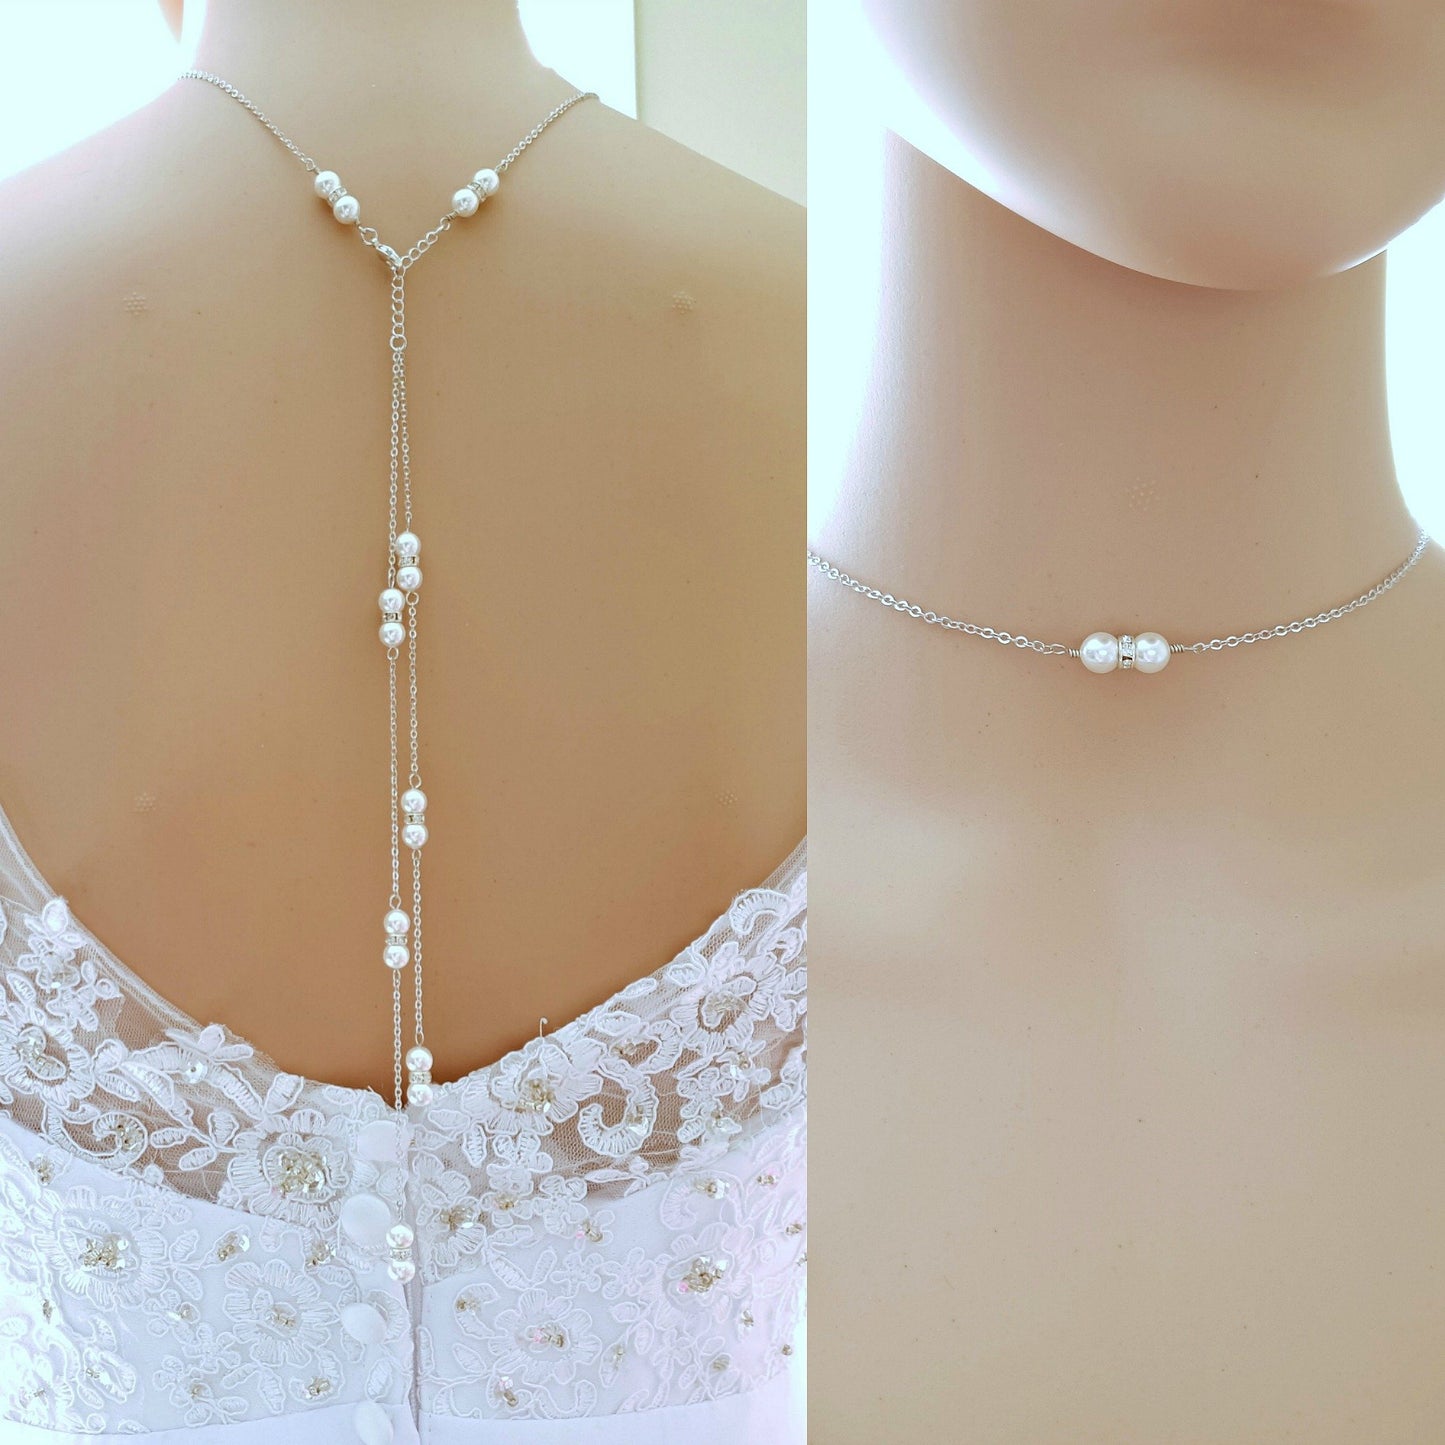 Pearl Choker Front and Back drop necklace for open back dress- Poetry Designs